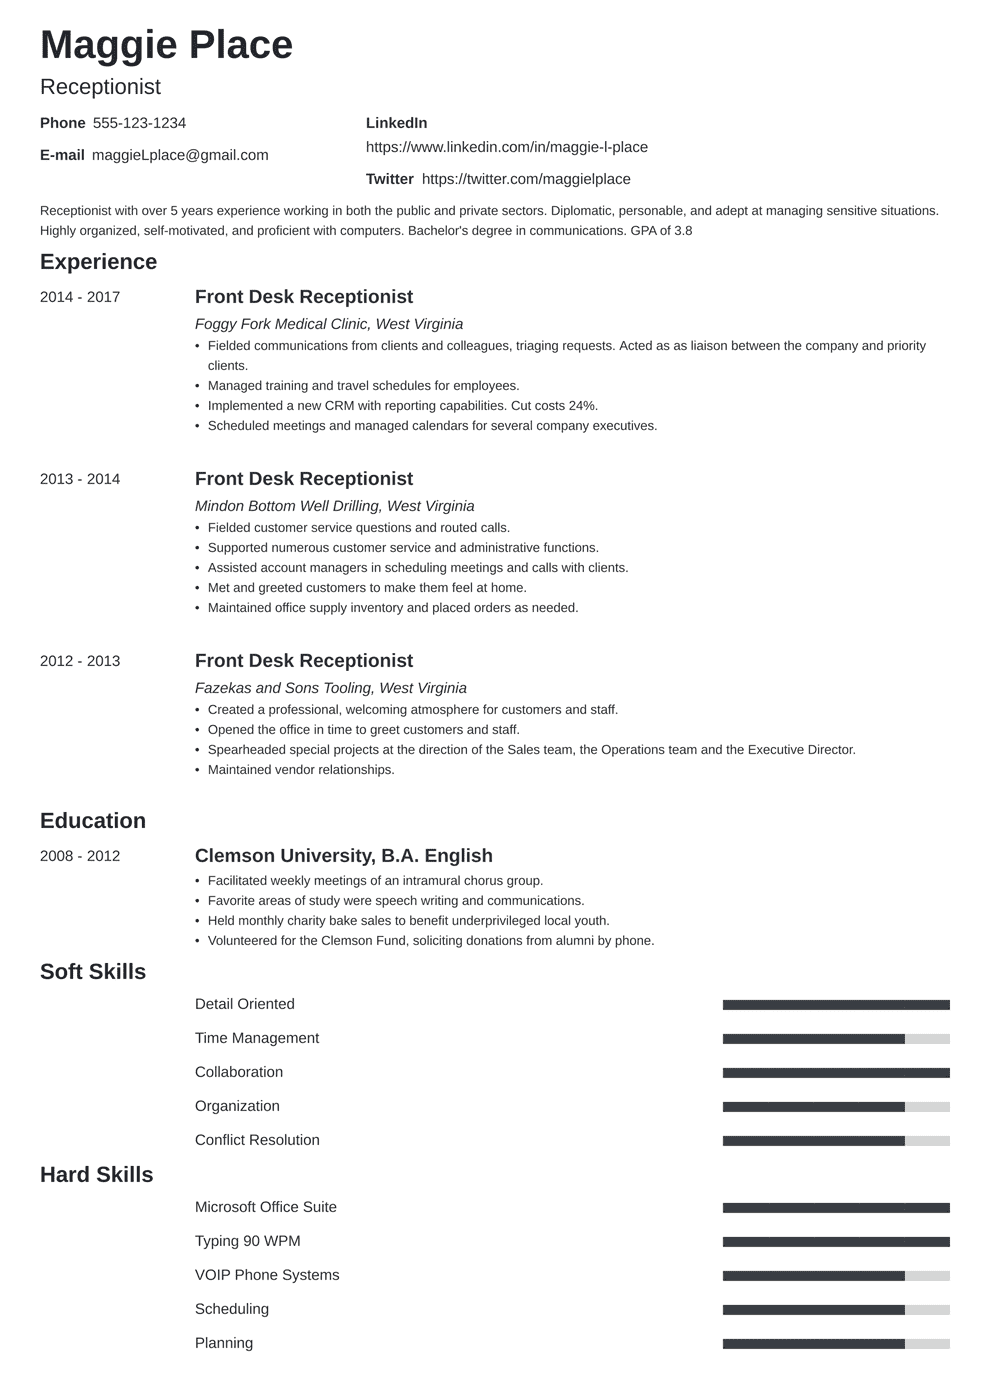 resume for a receptionist